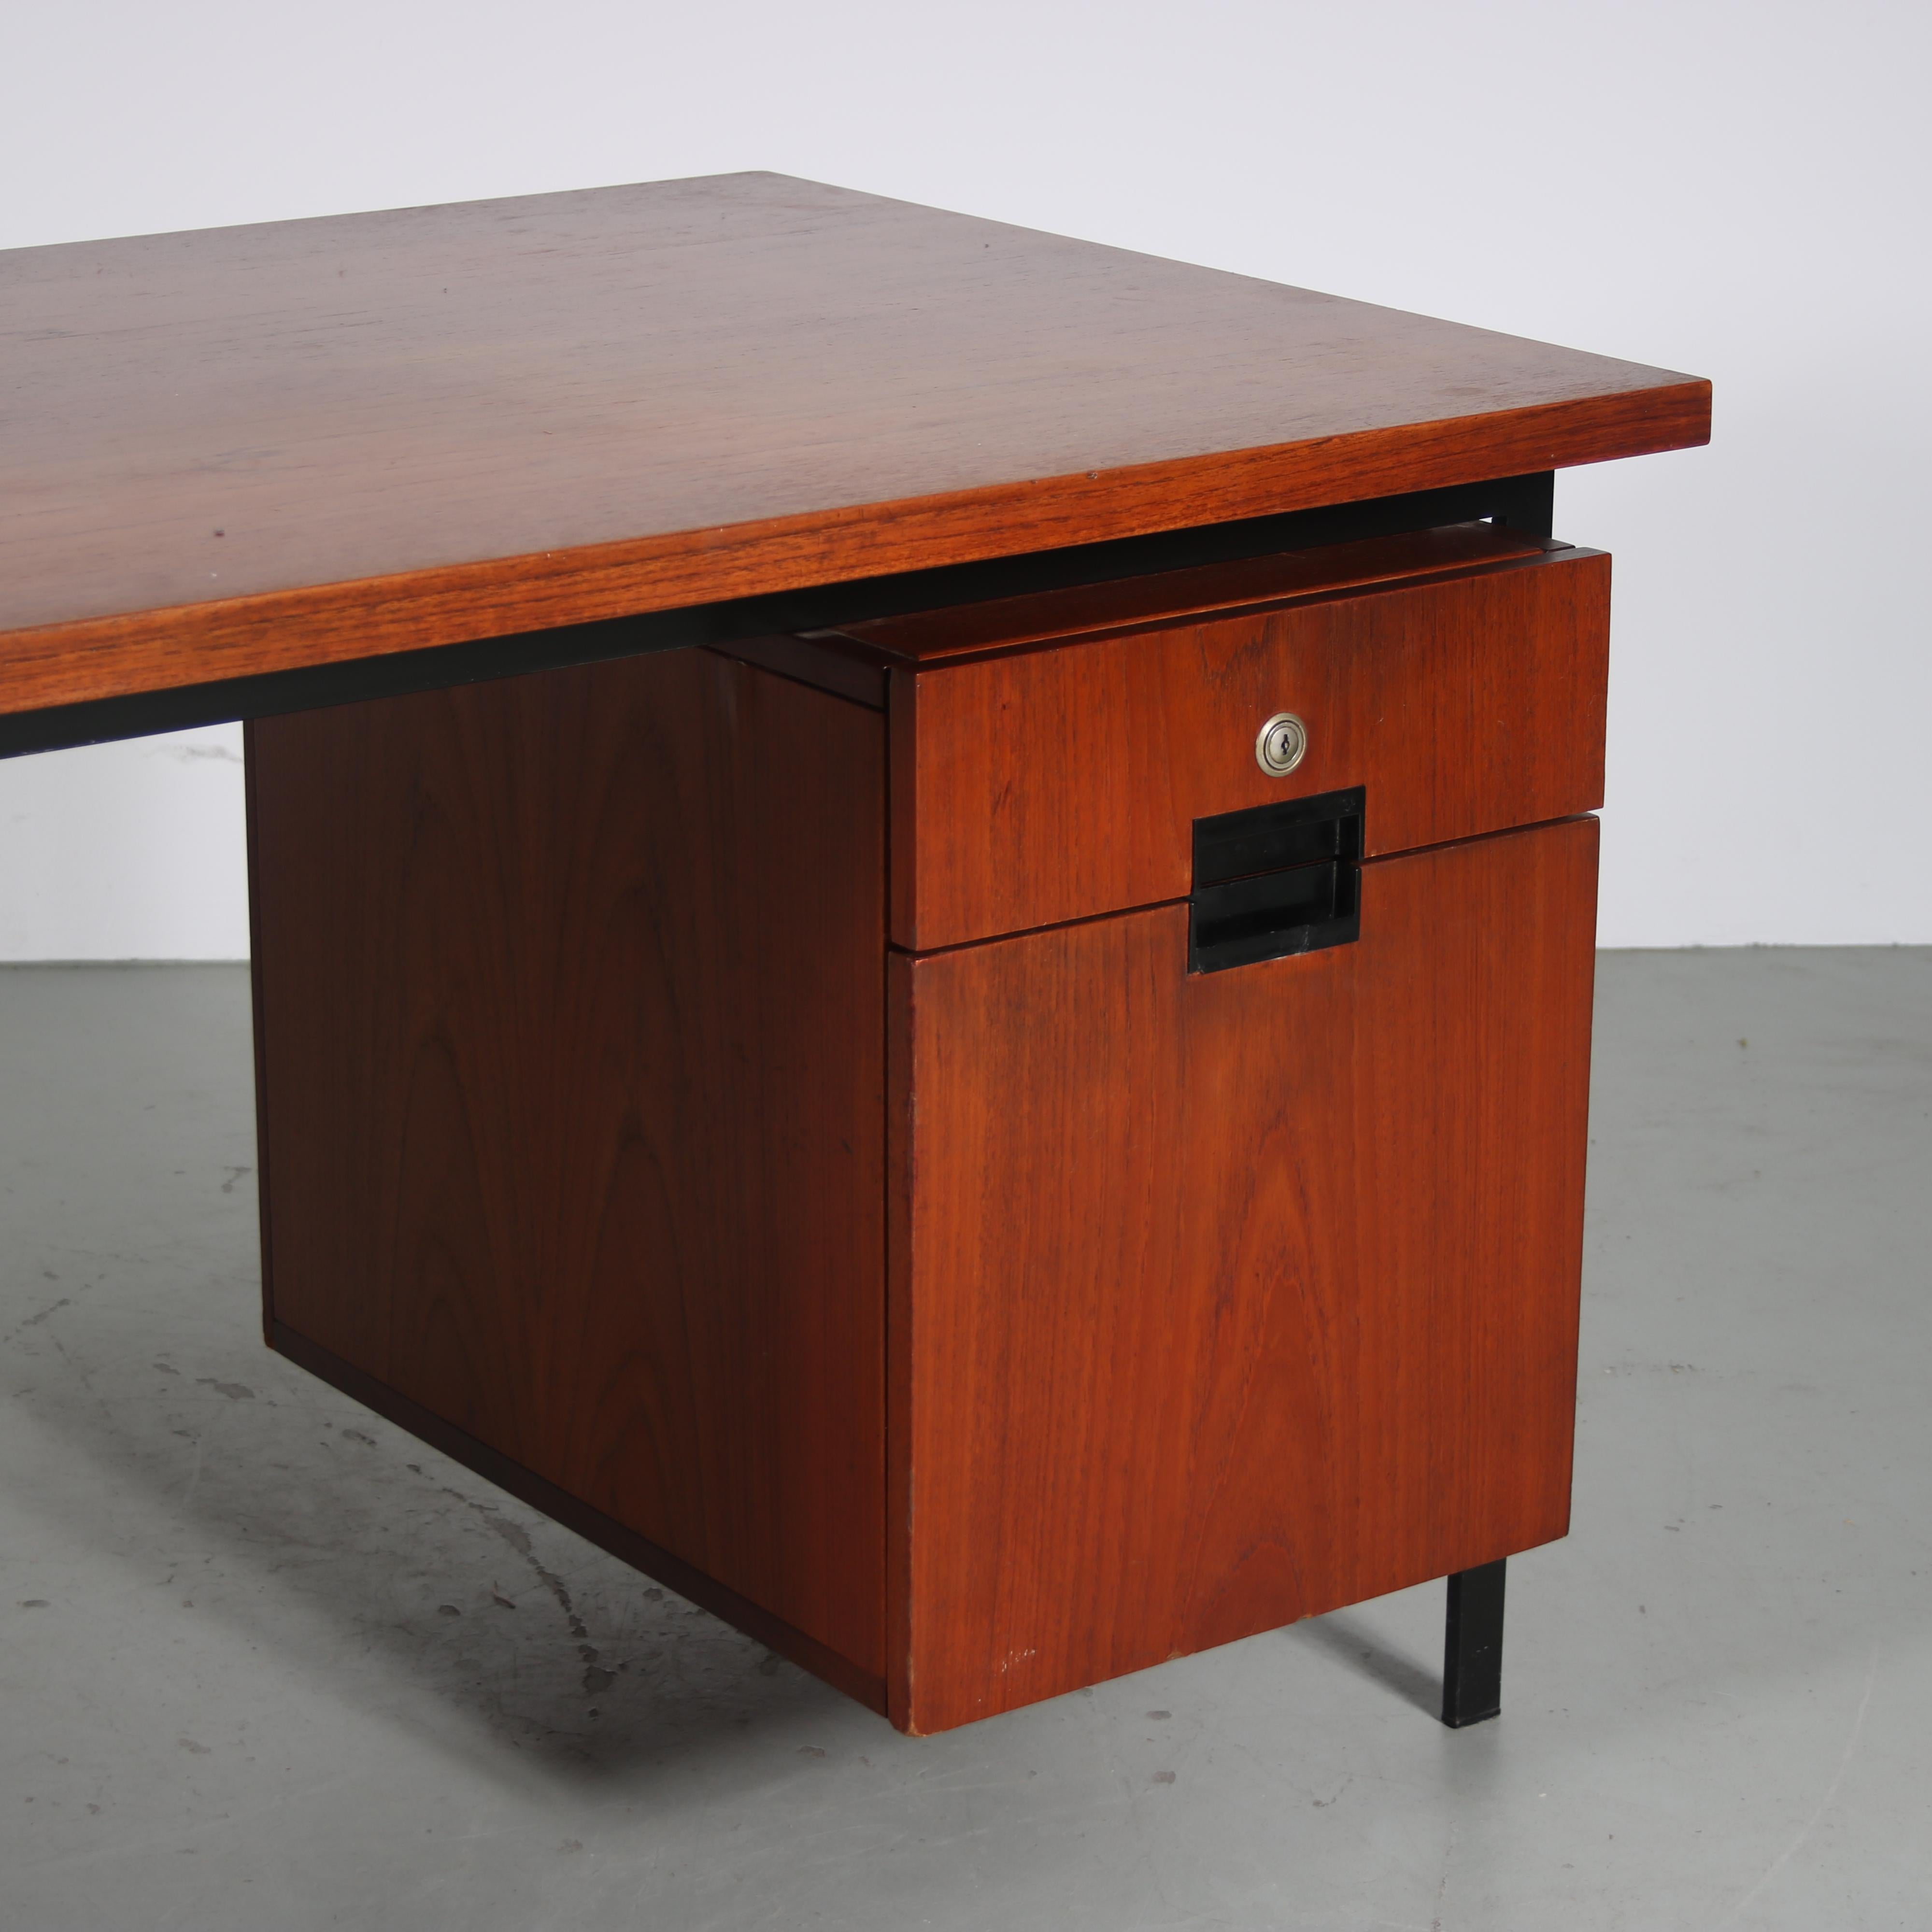 Mid-20th Century “Japanese Series” Desk by Cees Braakman for Pastoe, Netherlands 1960 For Sale